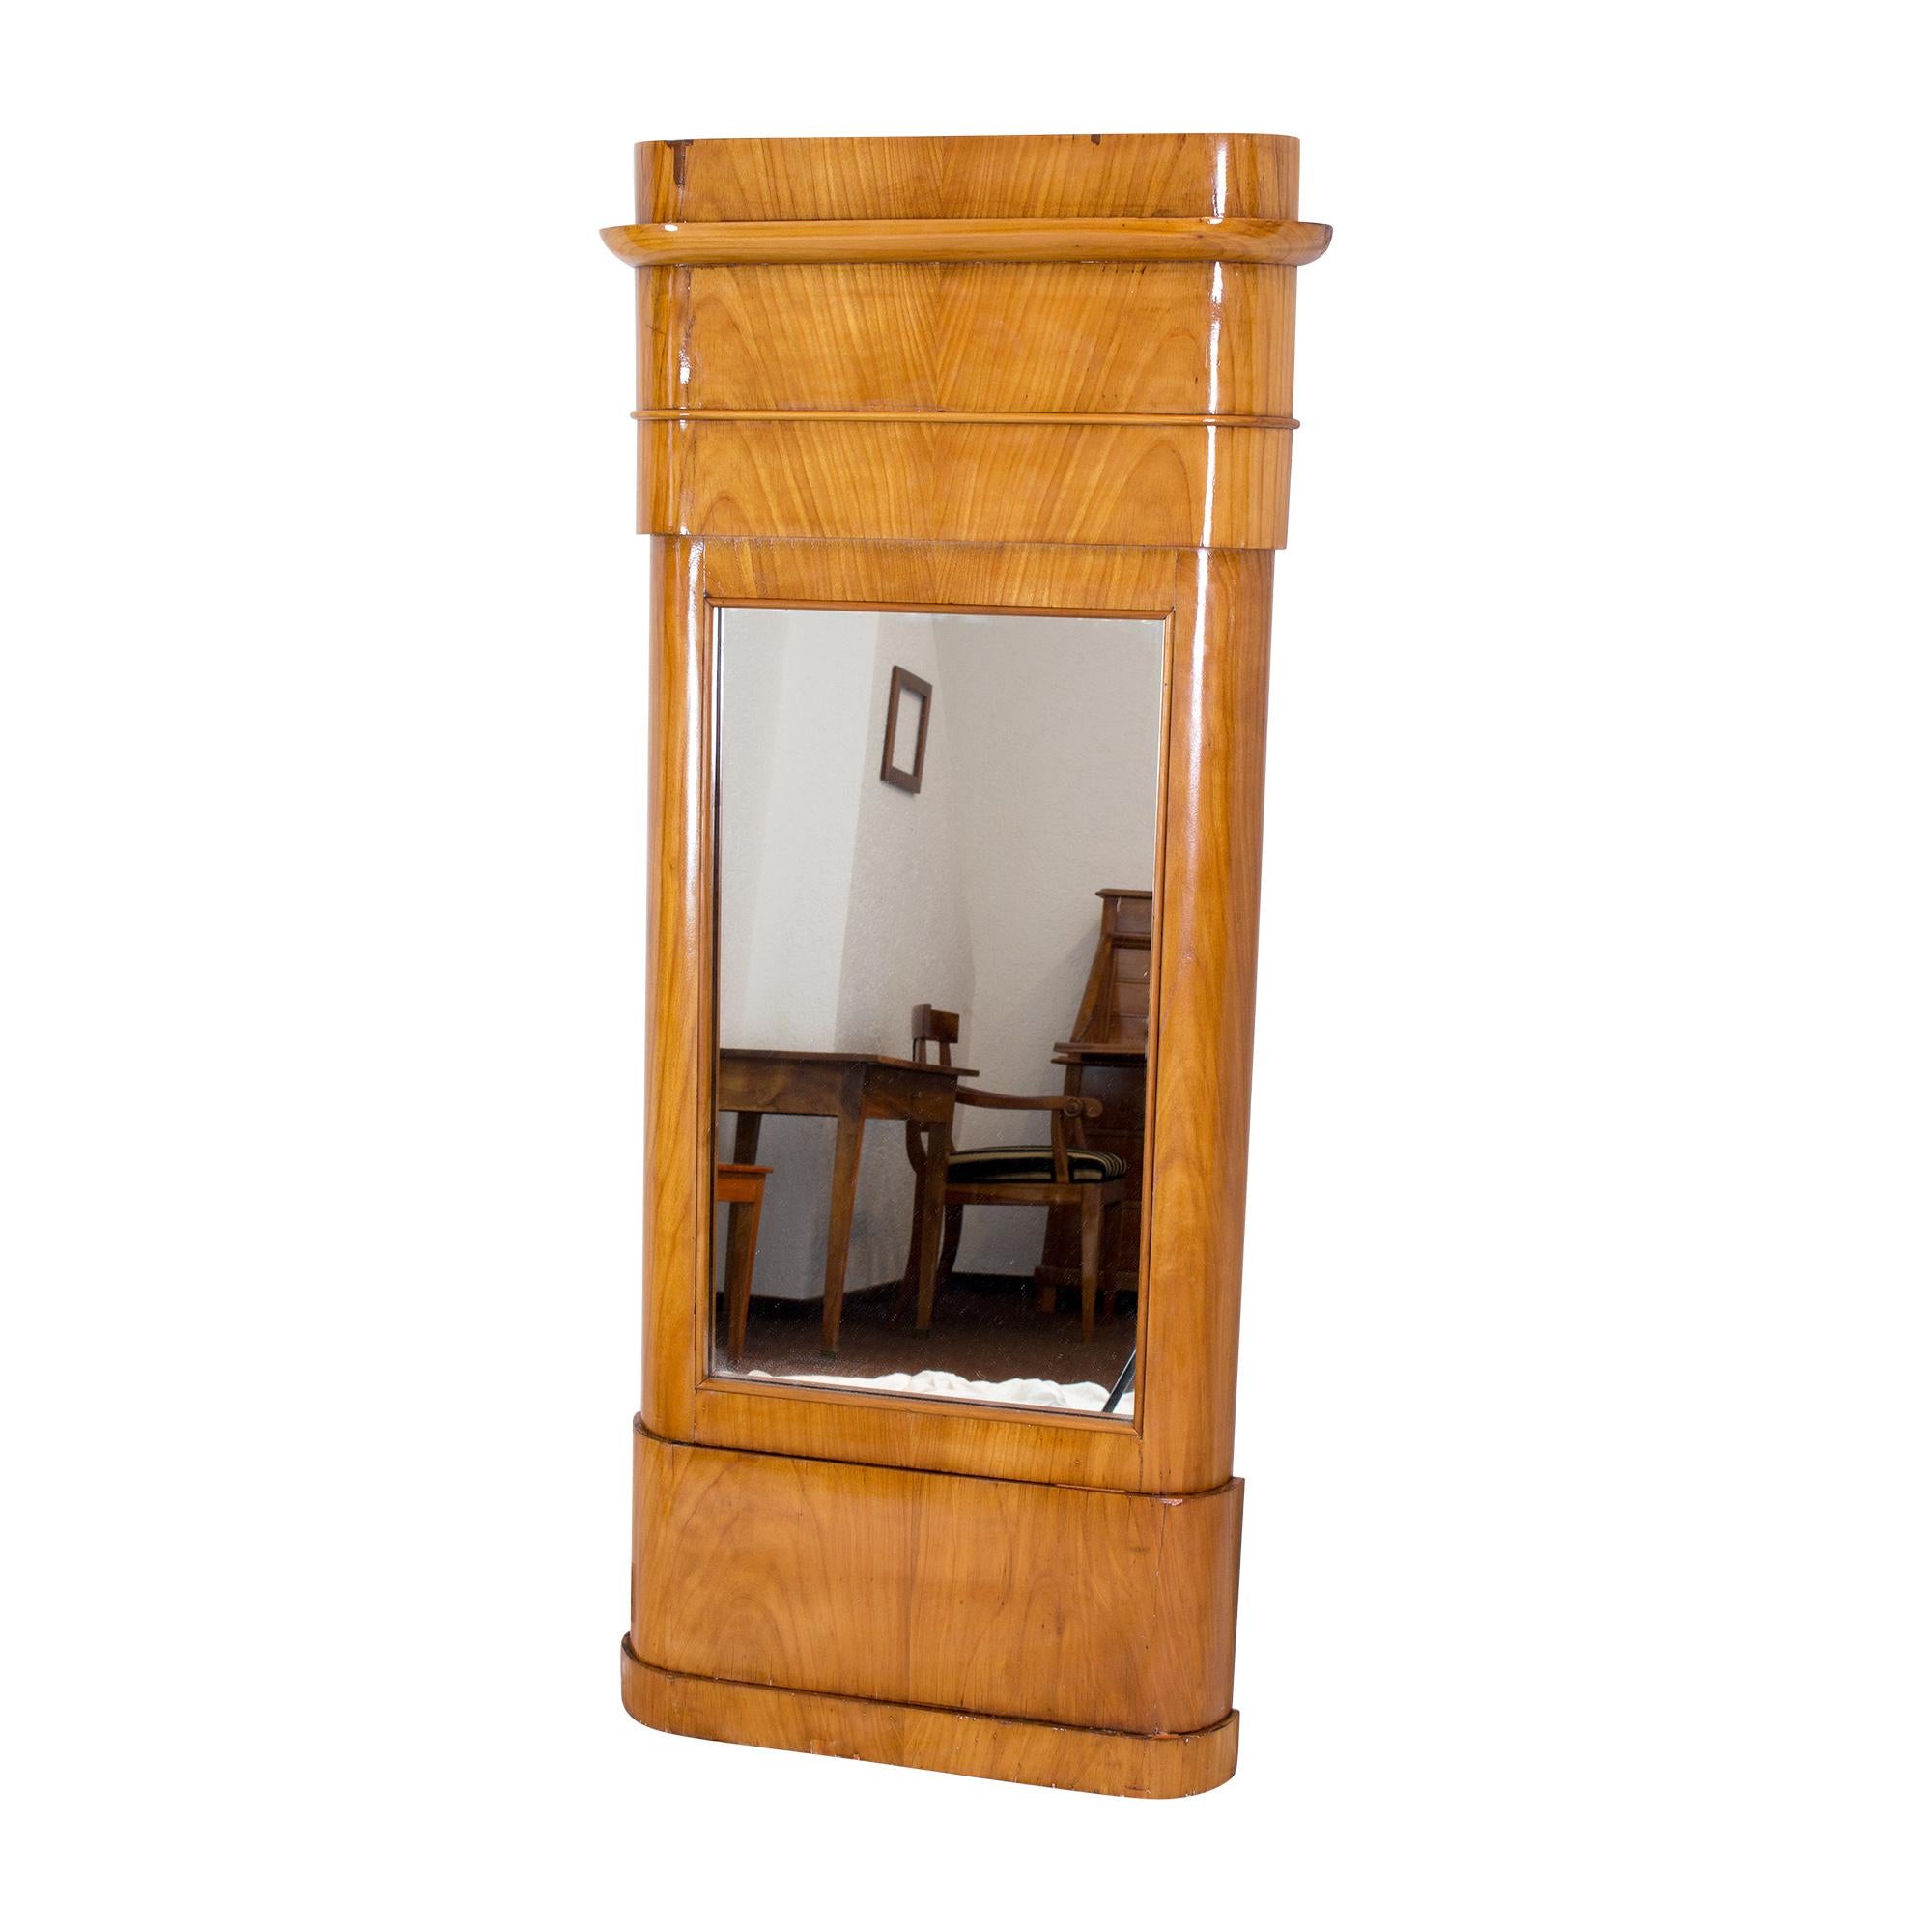 The mirror dates from the Biedermeier period and was made from cherry wood and spruce. Very nice soft edges. The mirror glass was replaced at some point and the mirror is still in good condition. Very good restored condition.